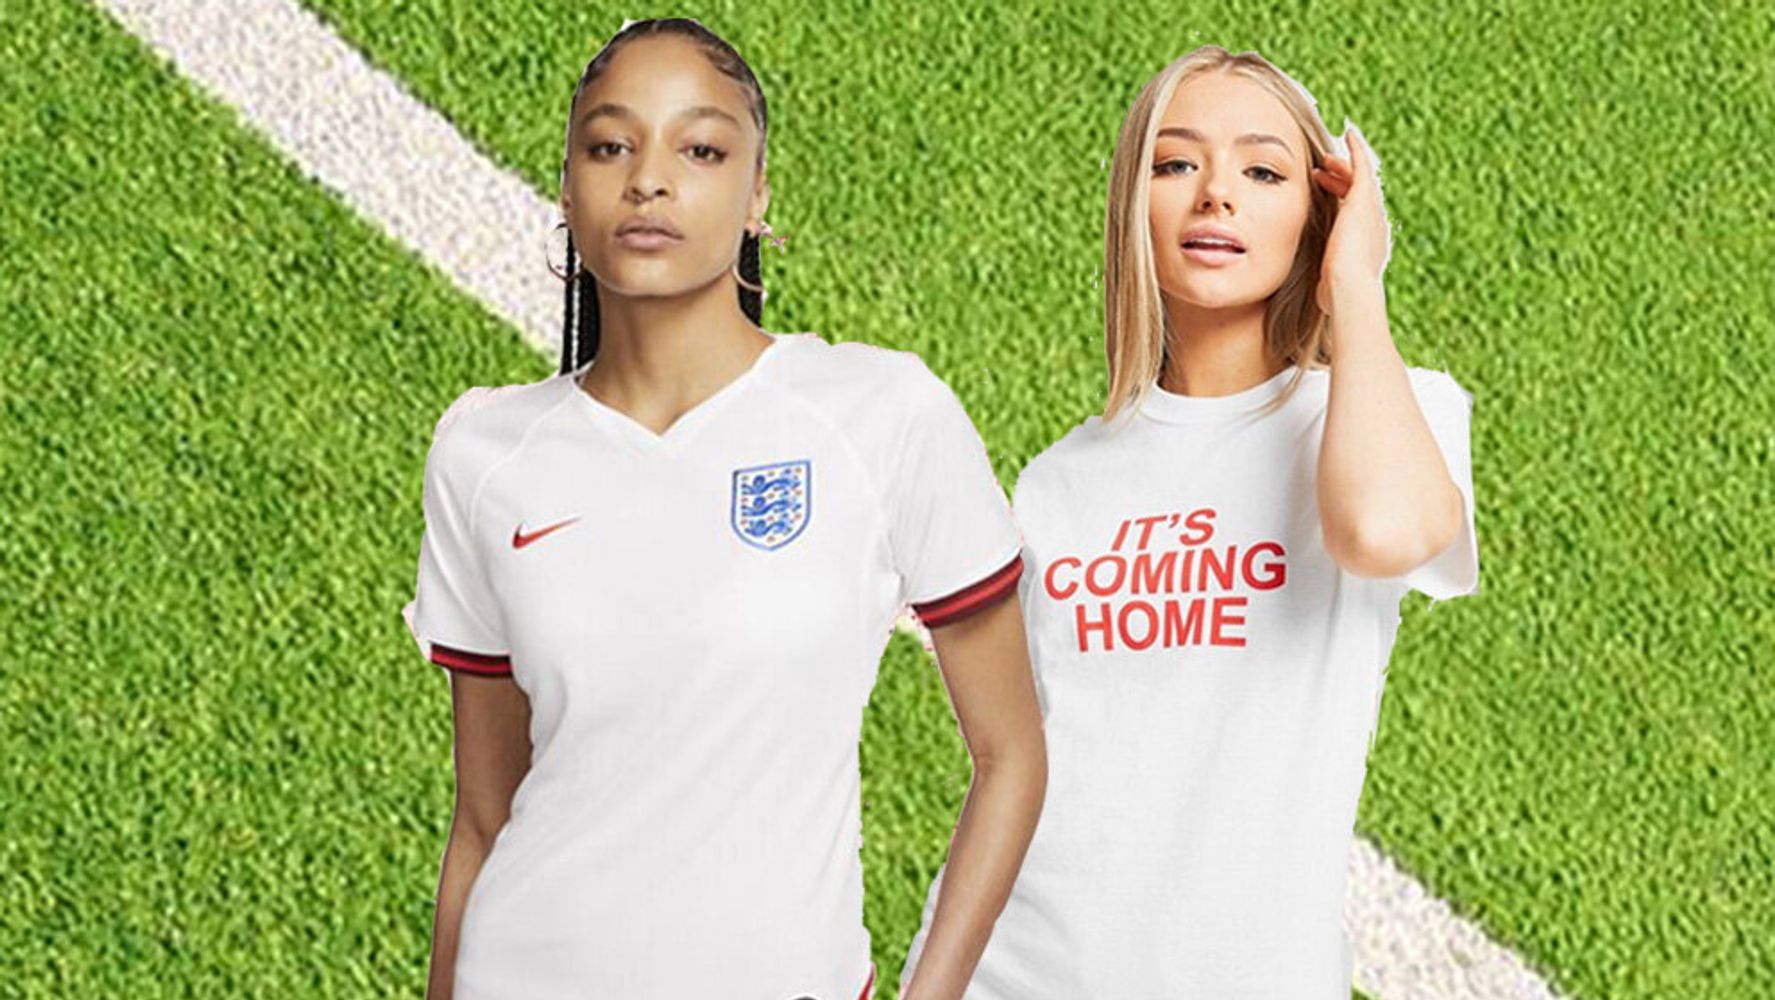 Women's World Cup: Where To Buy The England Kit (Plus Cheaper Alternatives To Wear At The Pub) - HuffPost UK Life